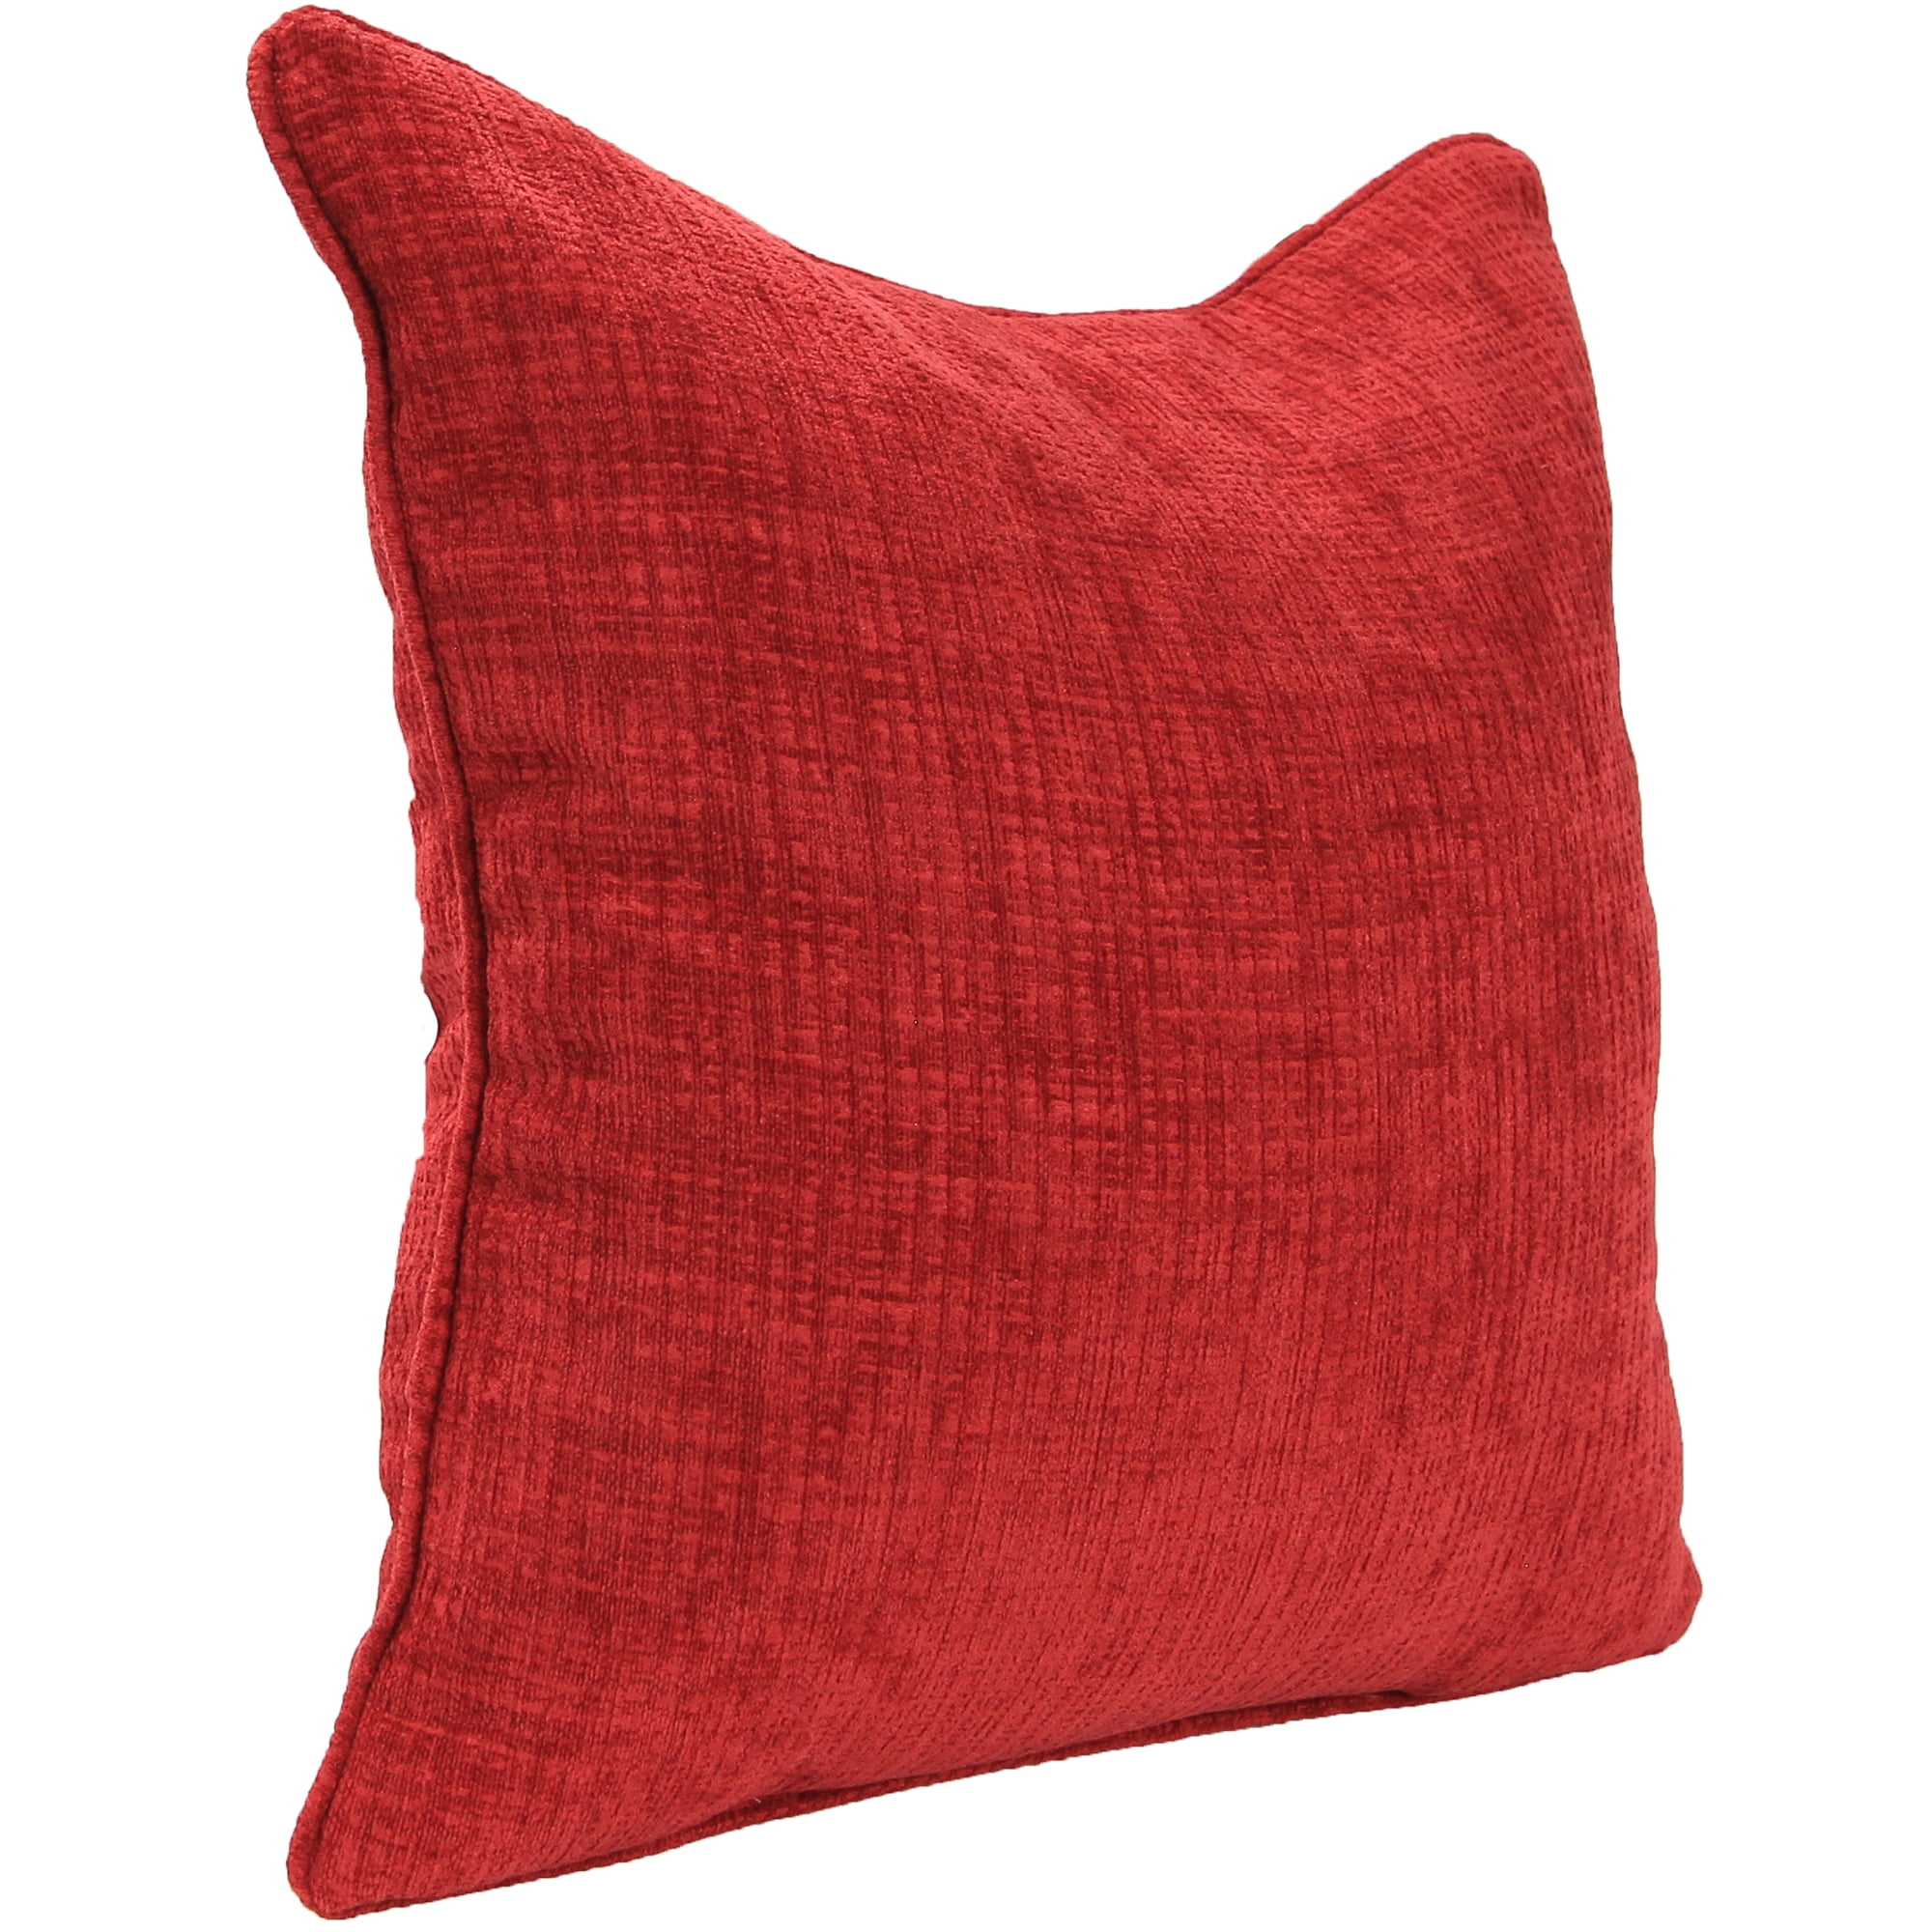 J Queen New York Red Garnet Red 18 inch Square Embellished Decorative Throw Pillow